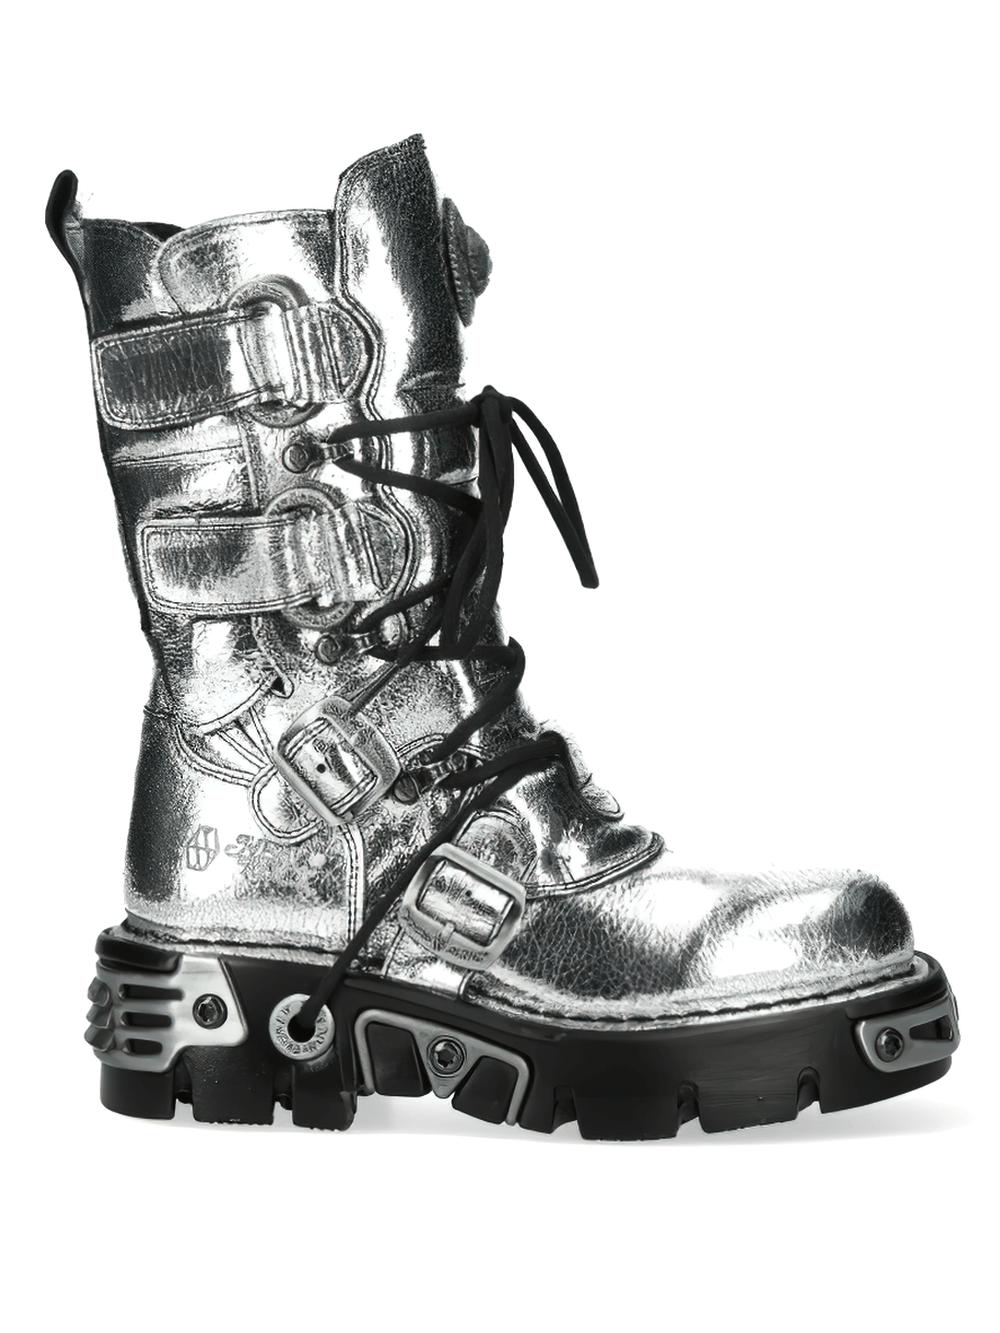 NEW ROCK Silver Gothic Boots with Buckles and Lace-Up